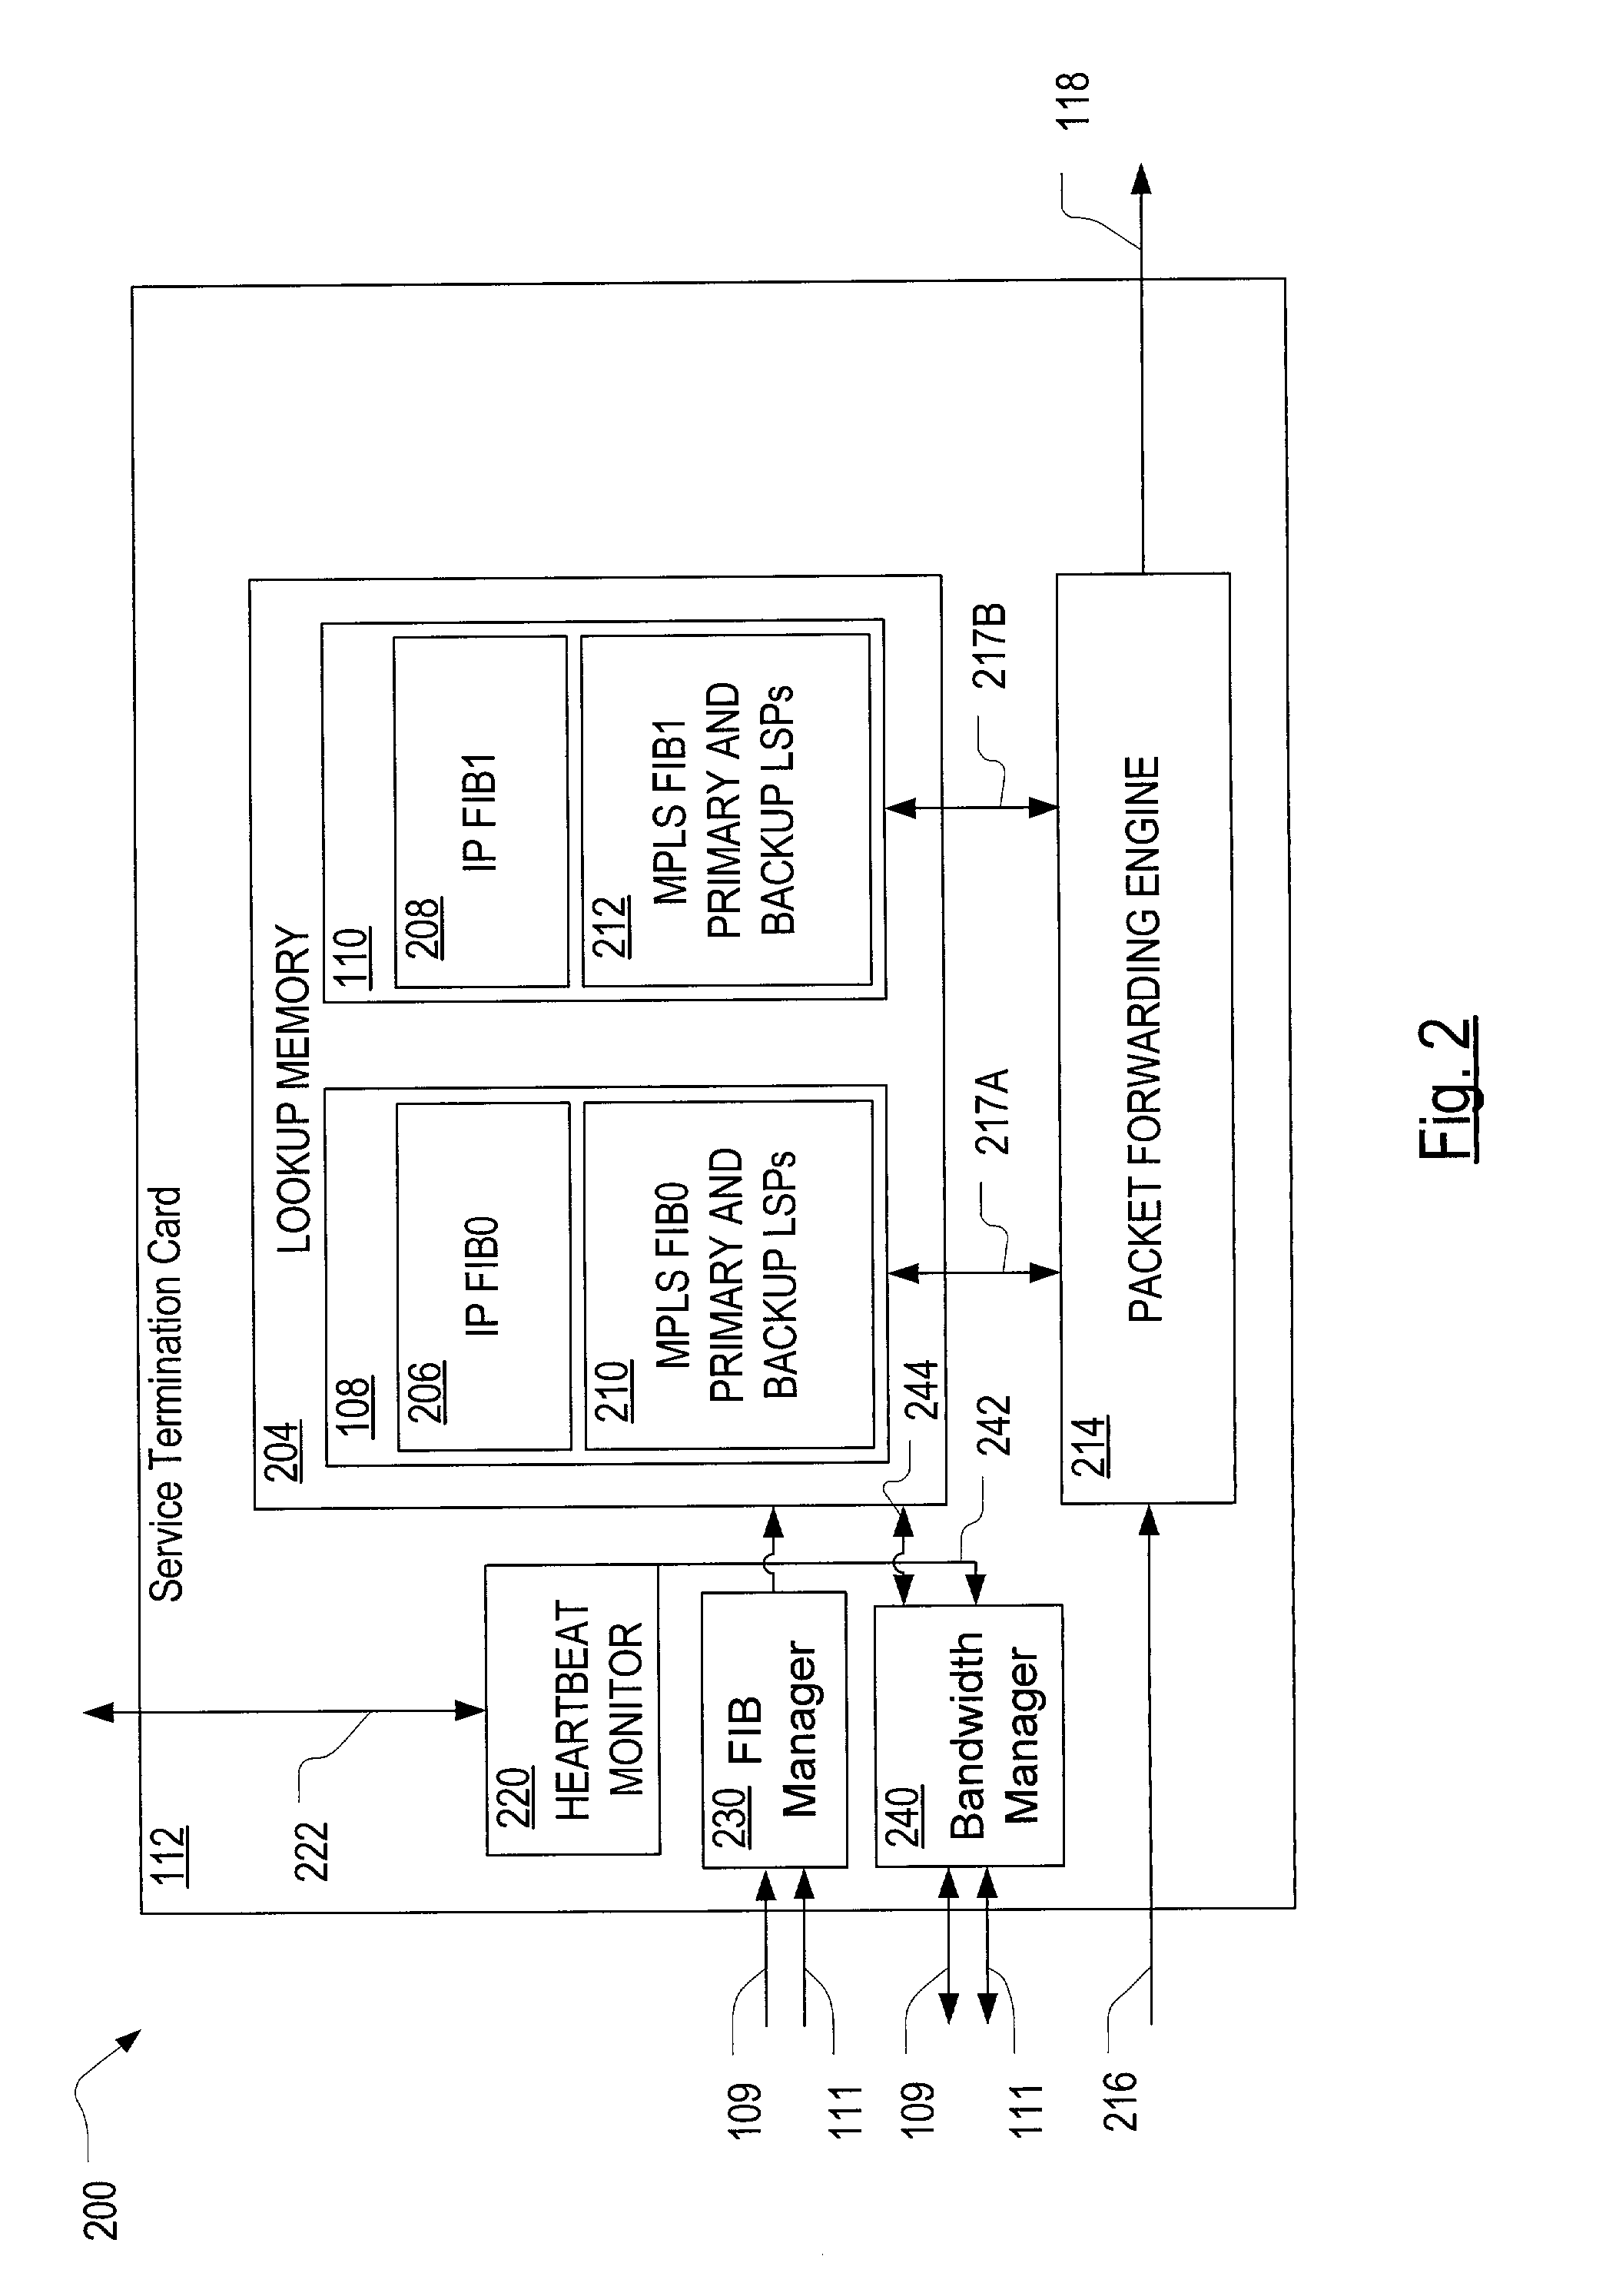 High availability packet forward apparatus and method